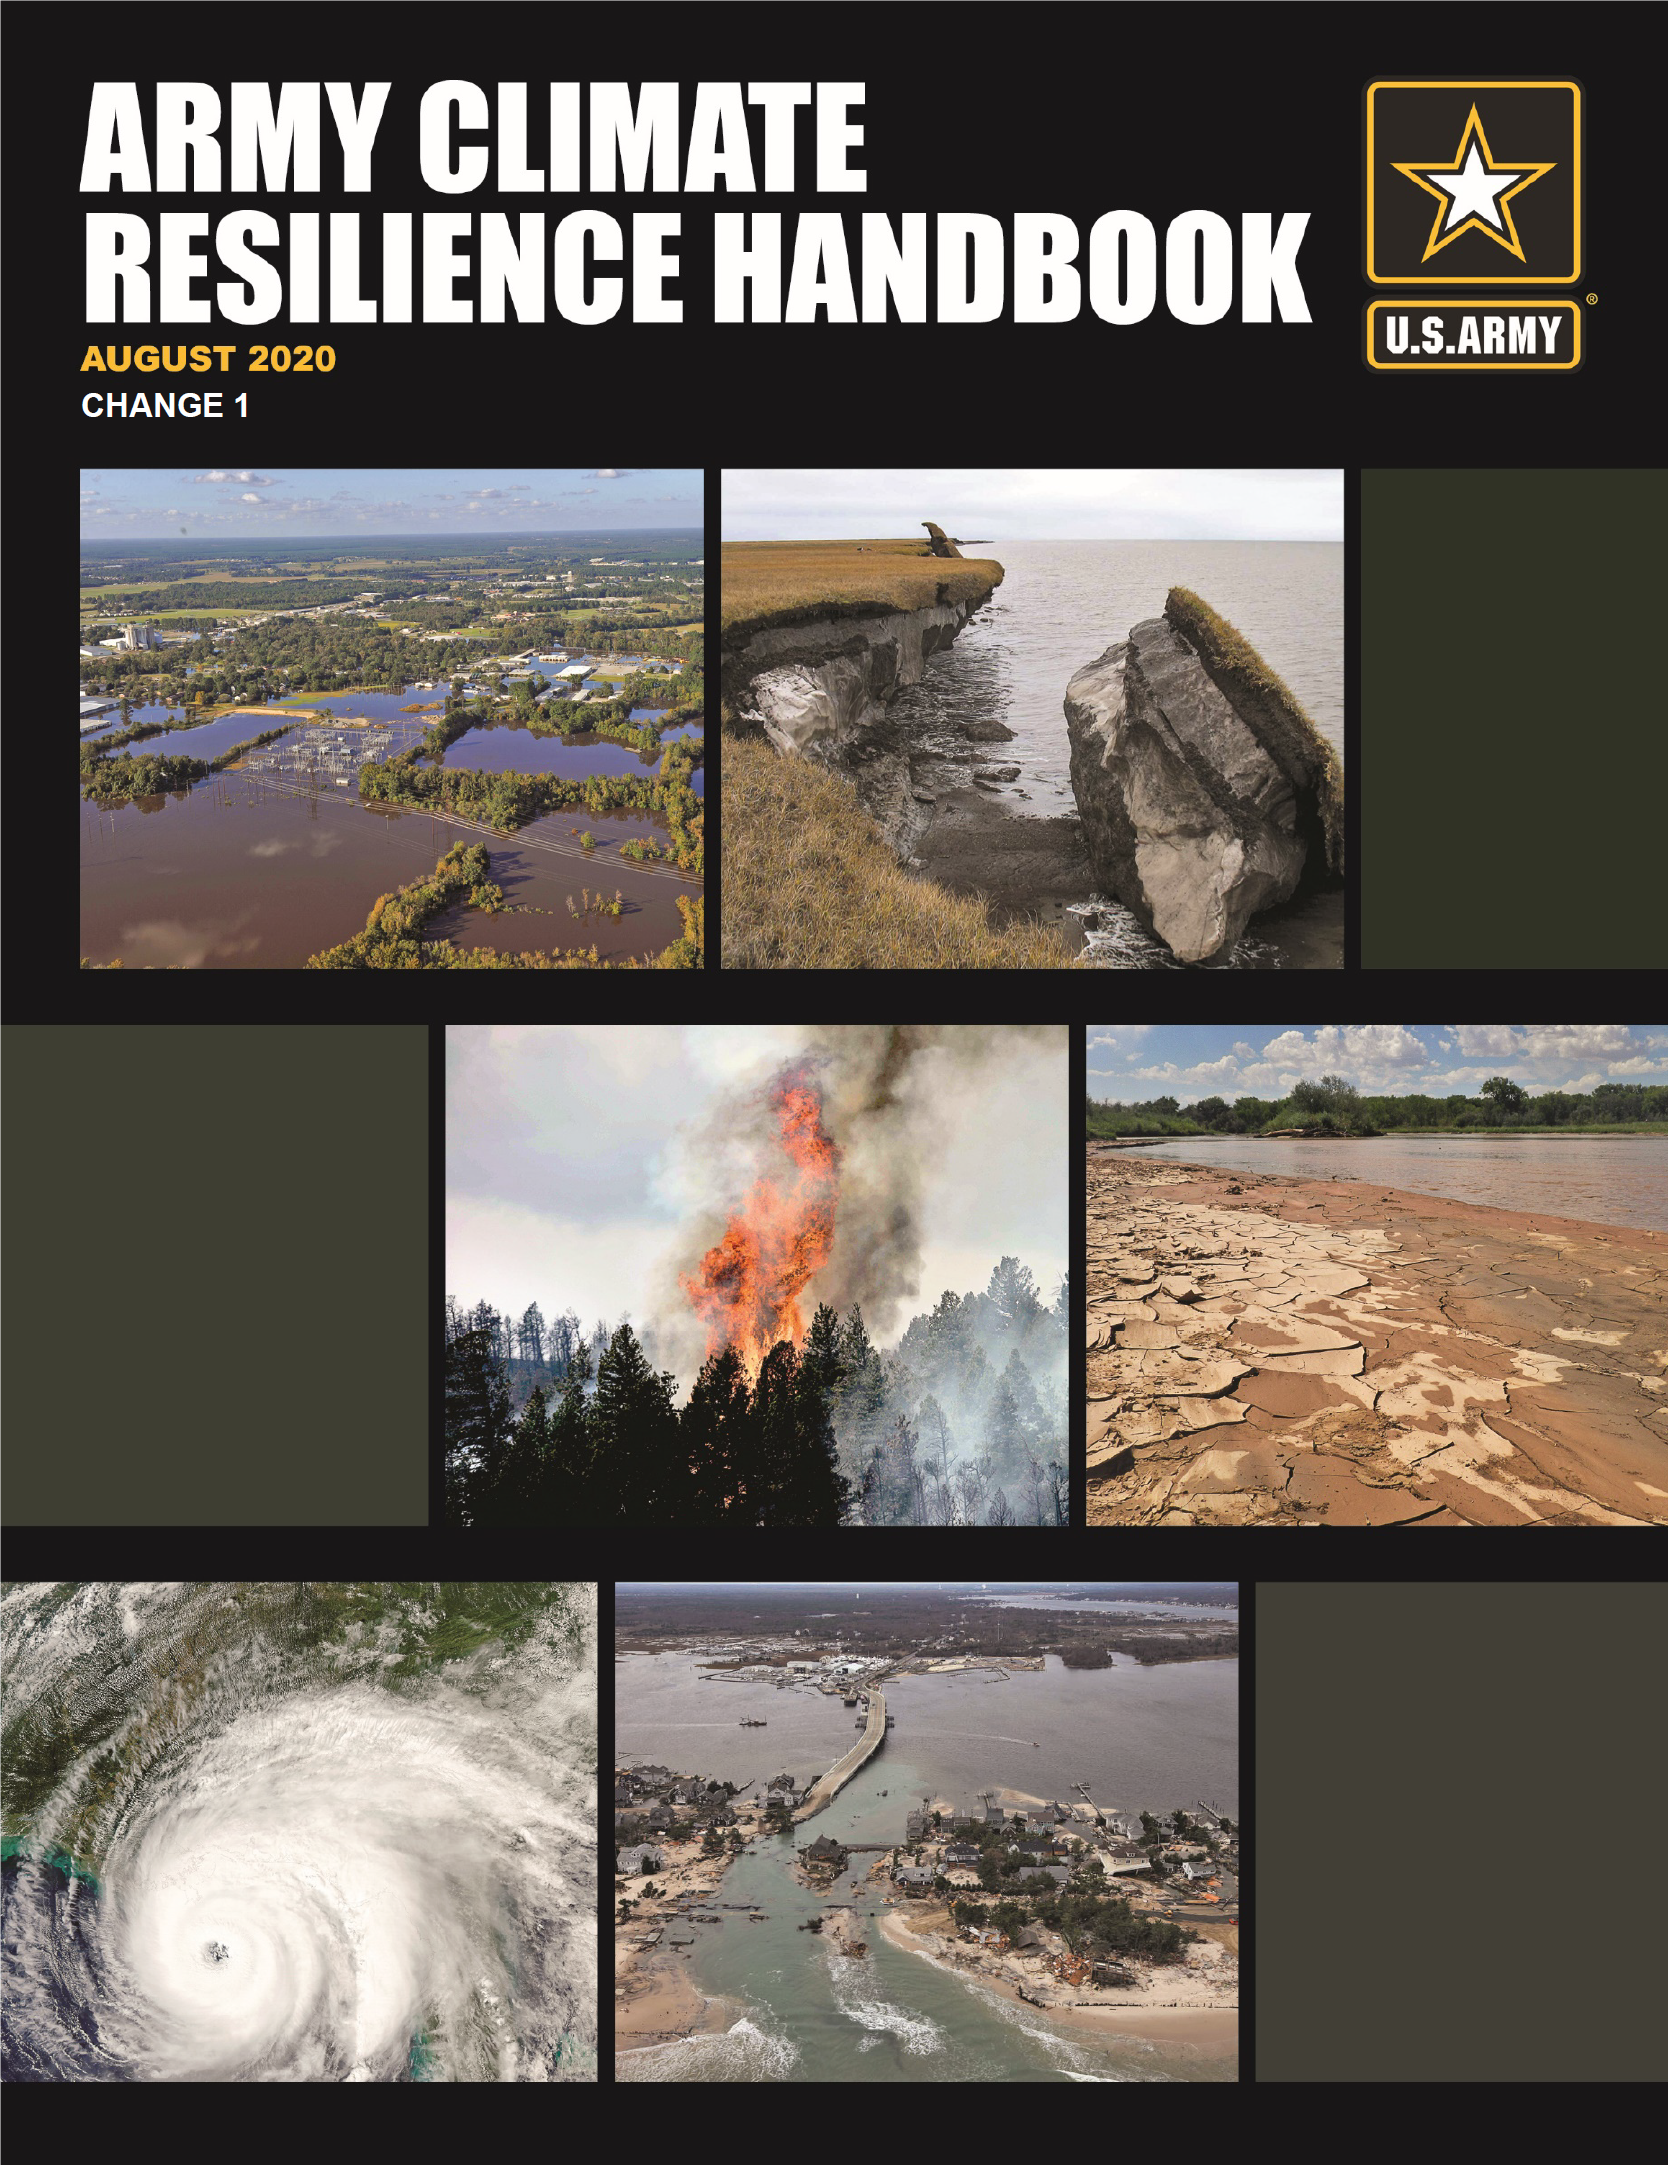 ACAT and Climate Resilience Handbook